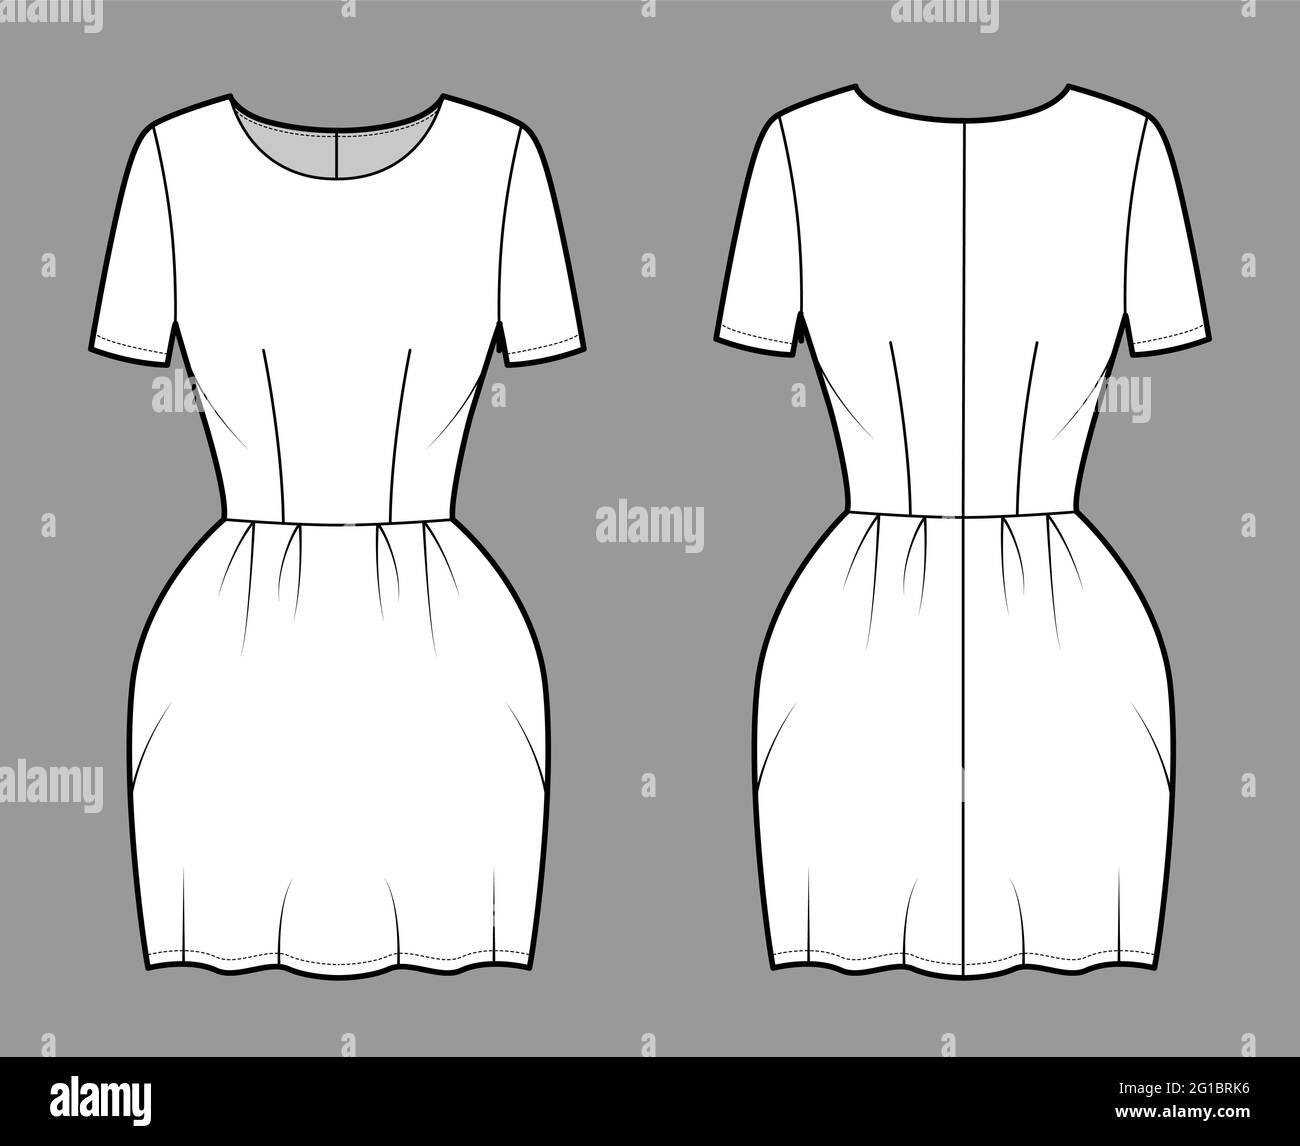 Dress bell technical fashion illustration with short sleeves, fitted ...